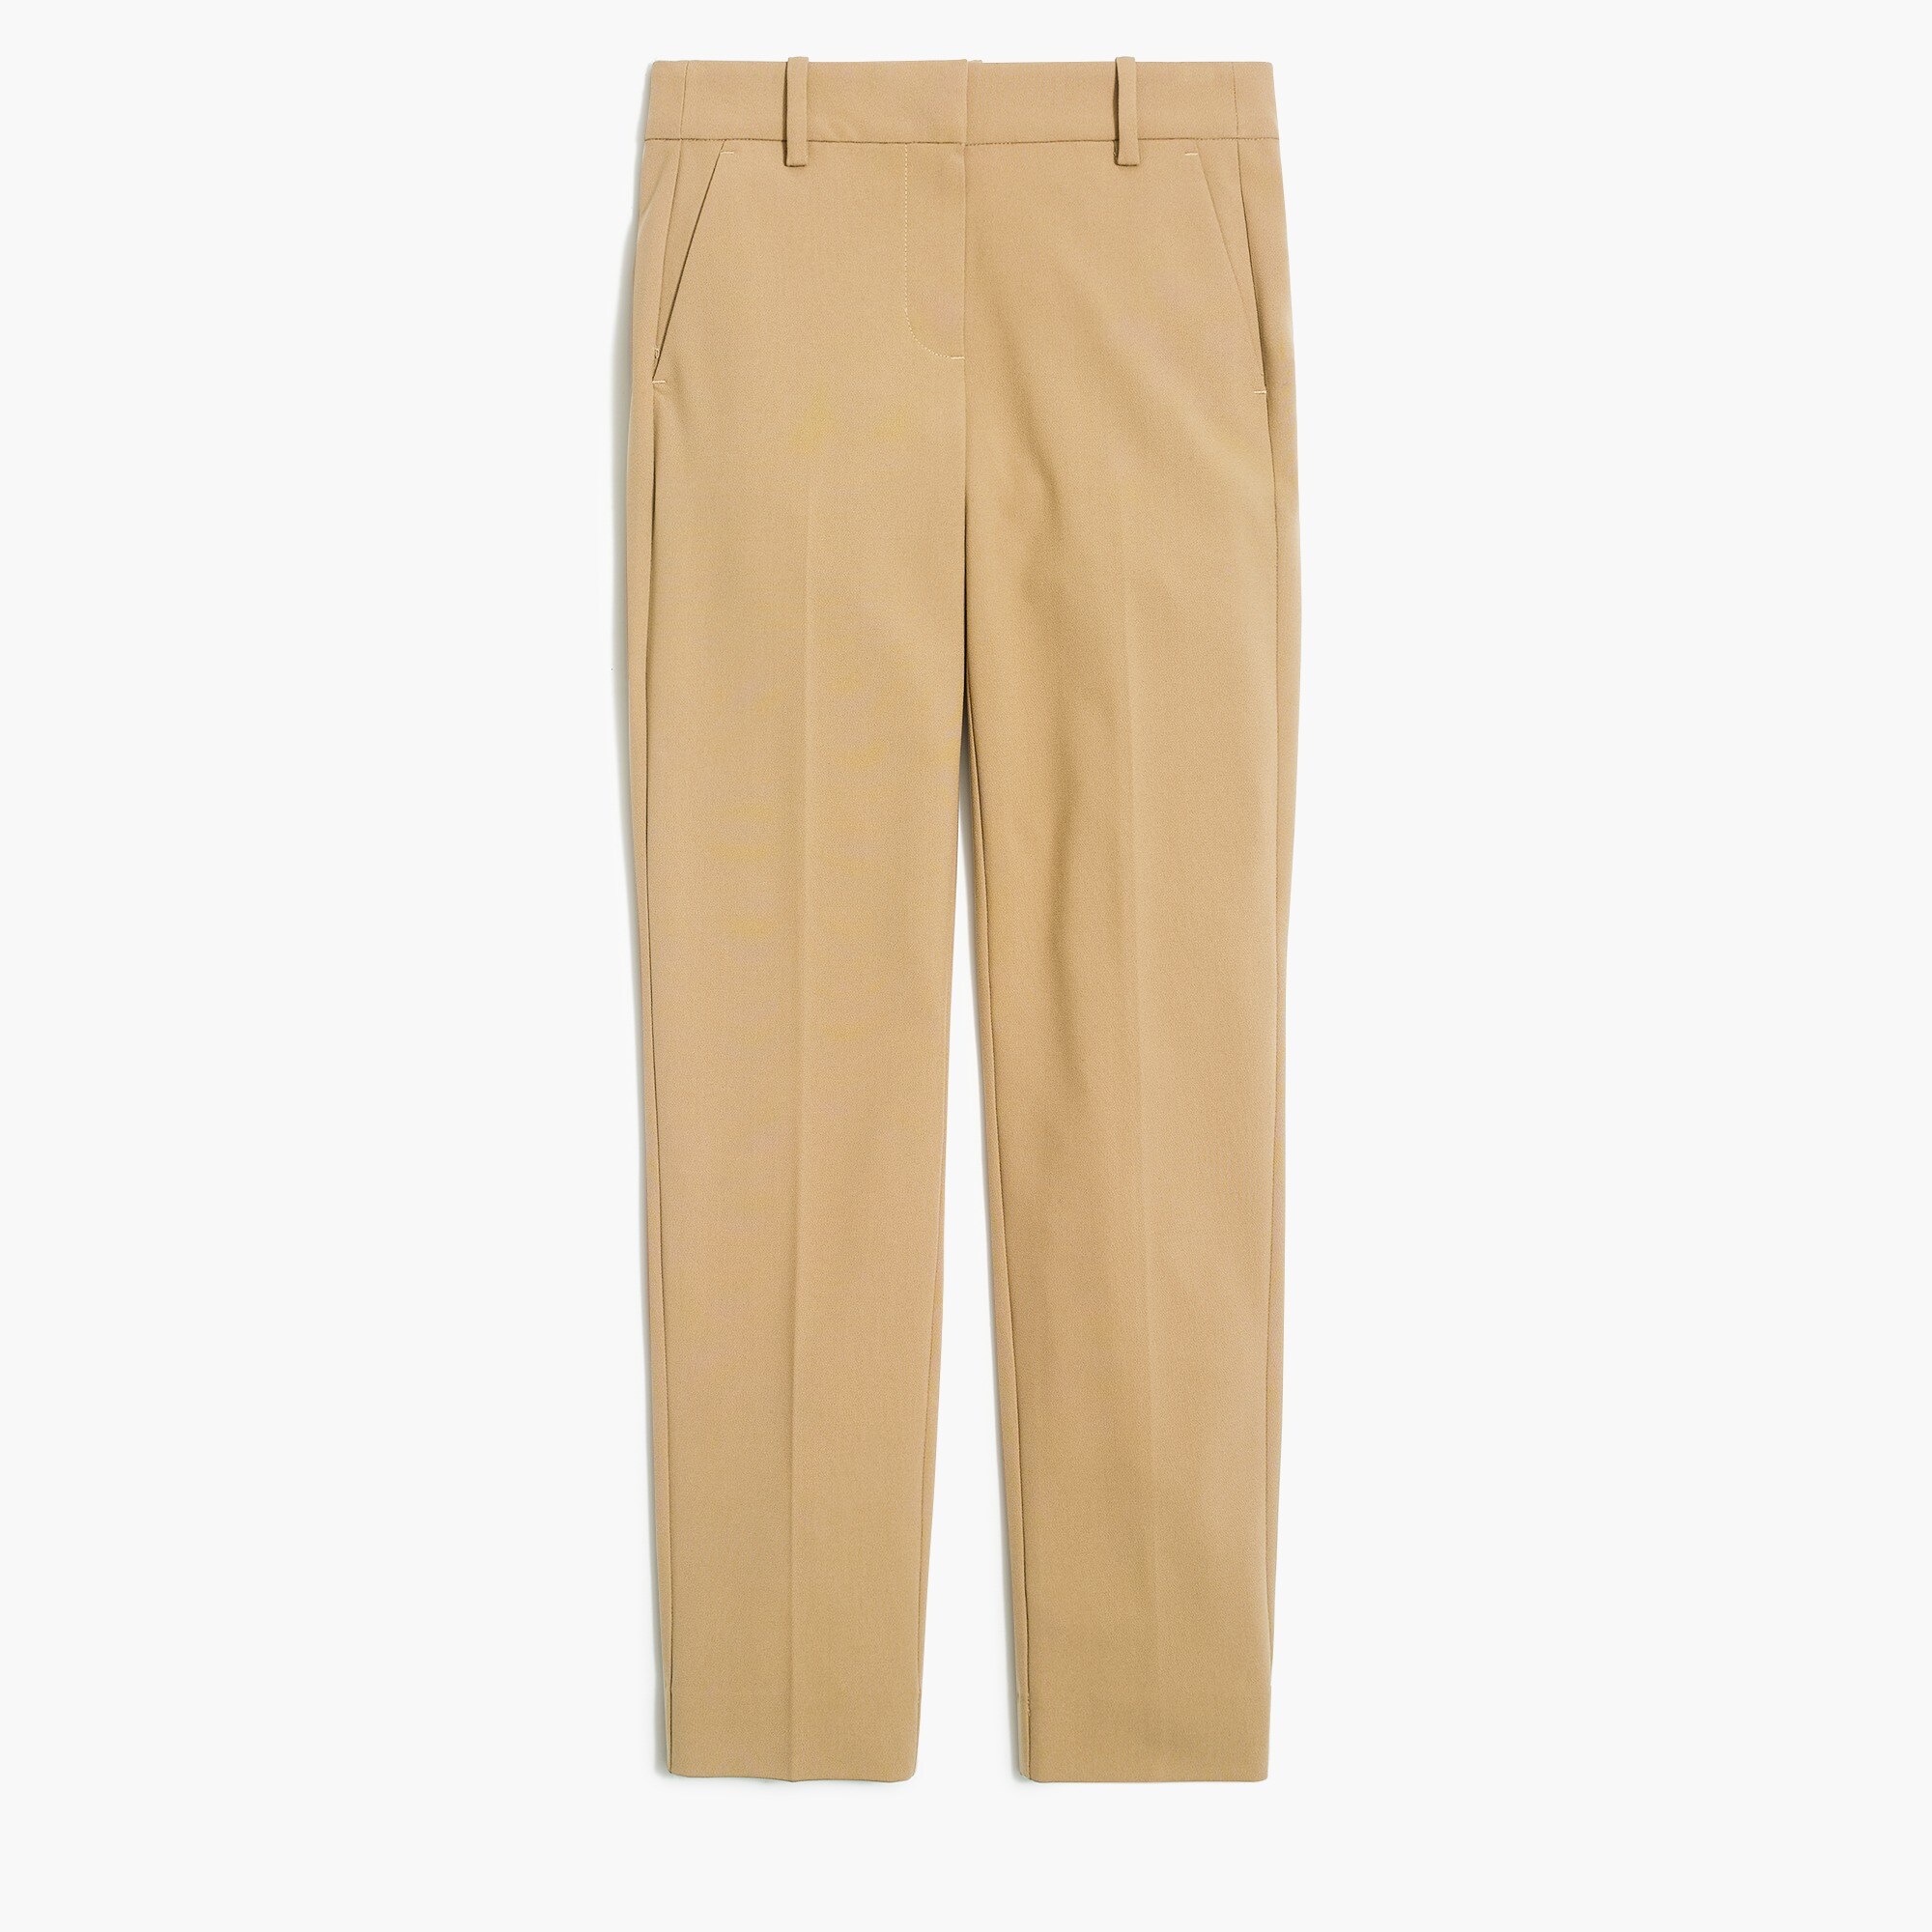  Slim cropped Ruby pant in stretch twill